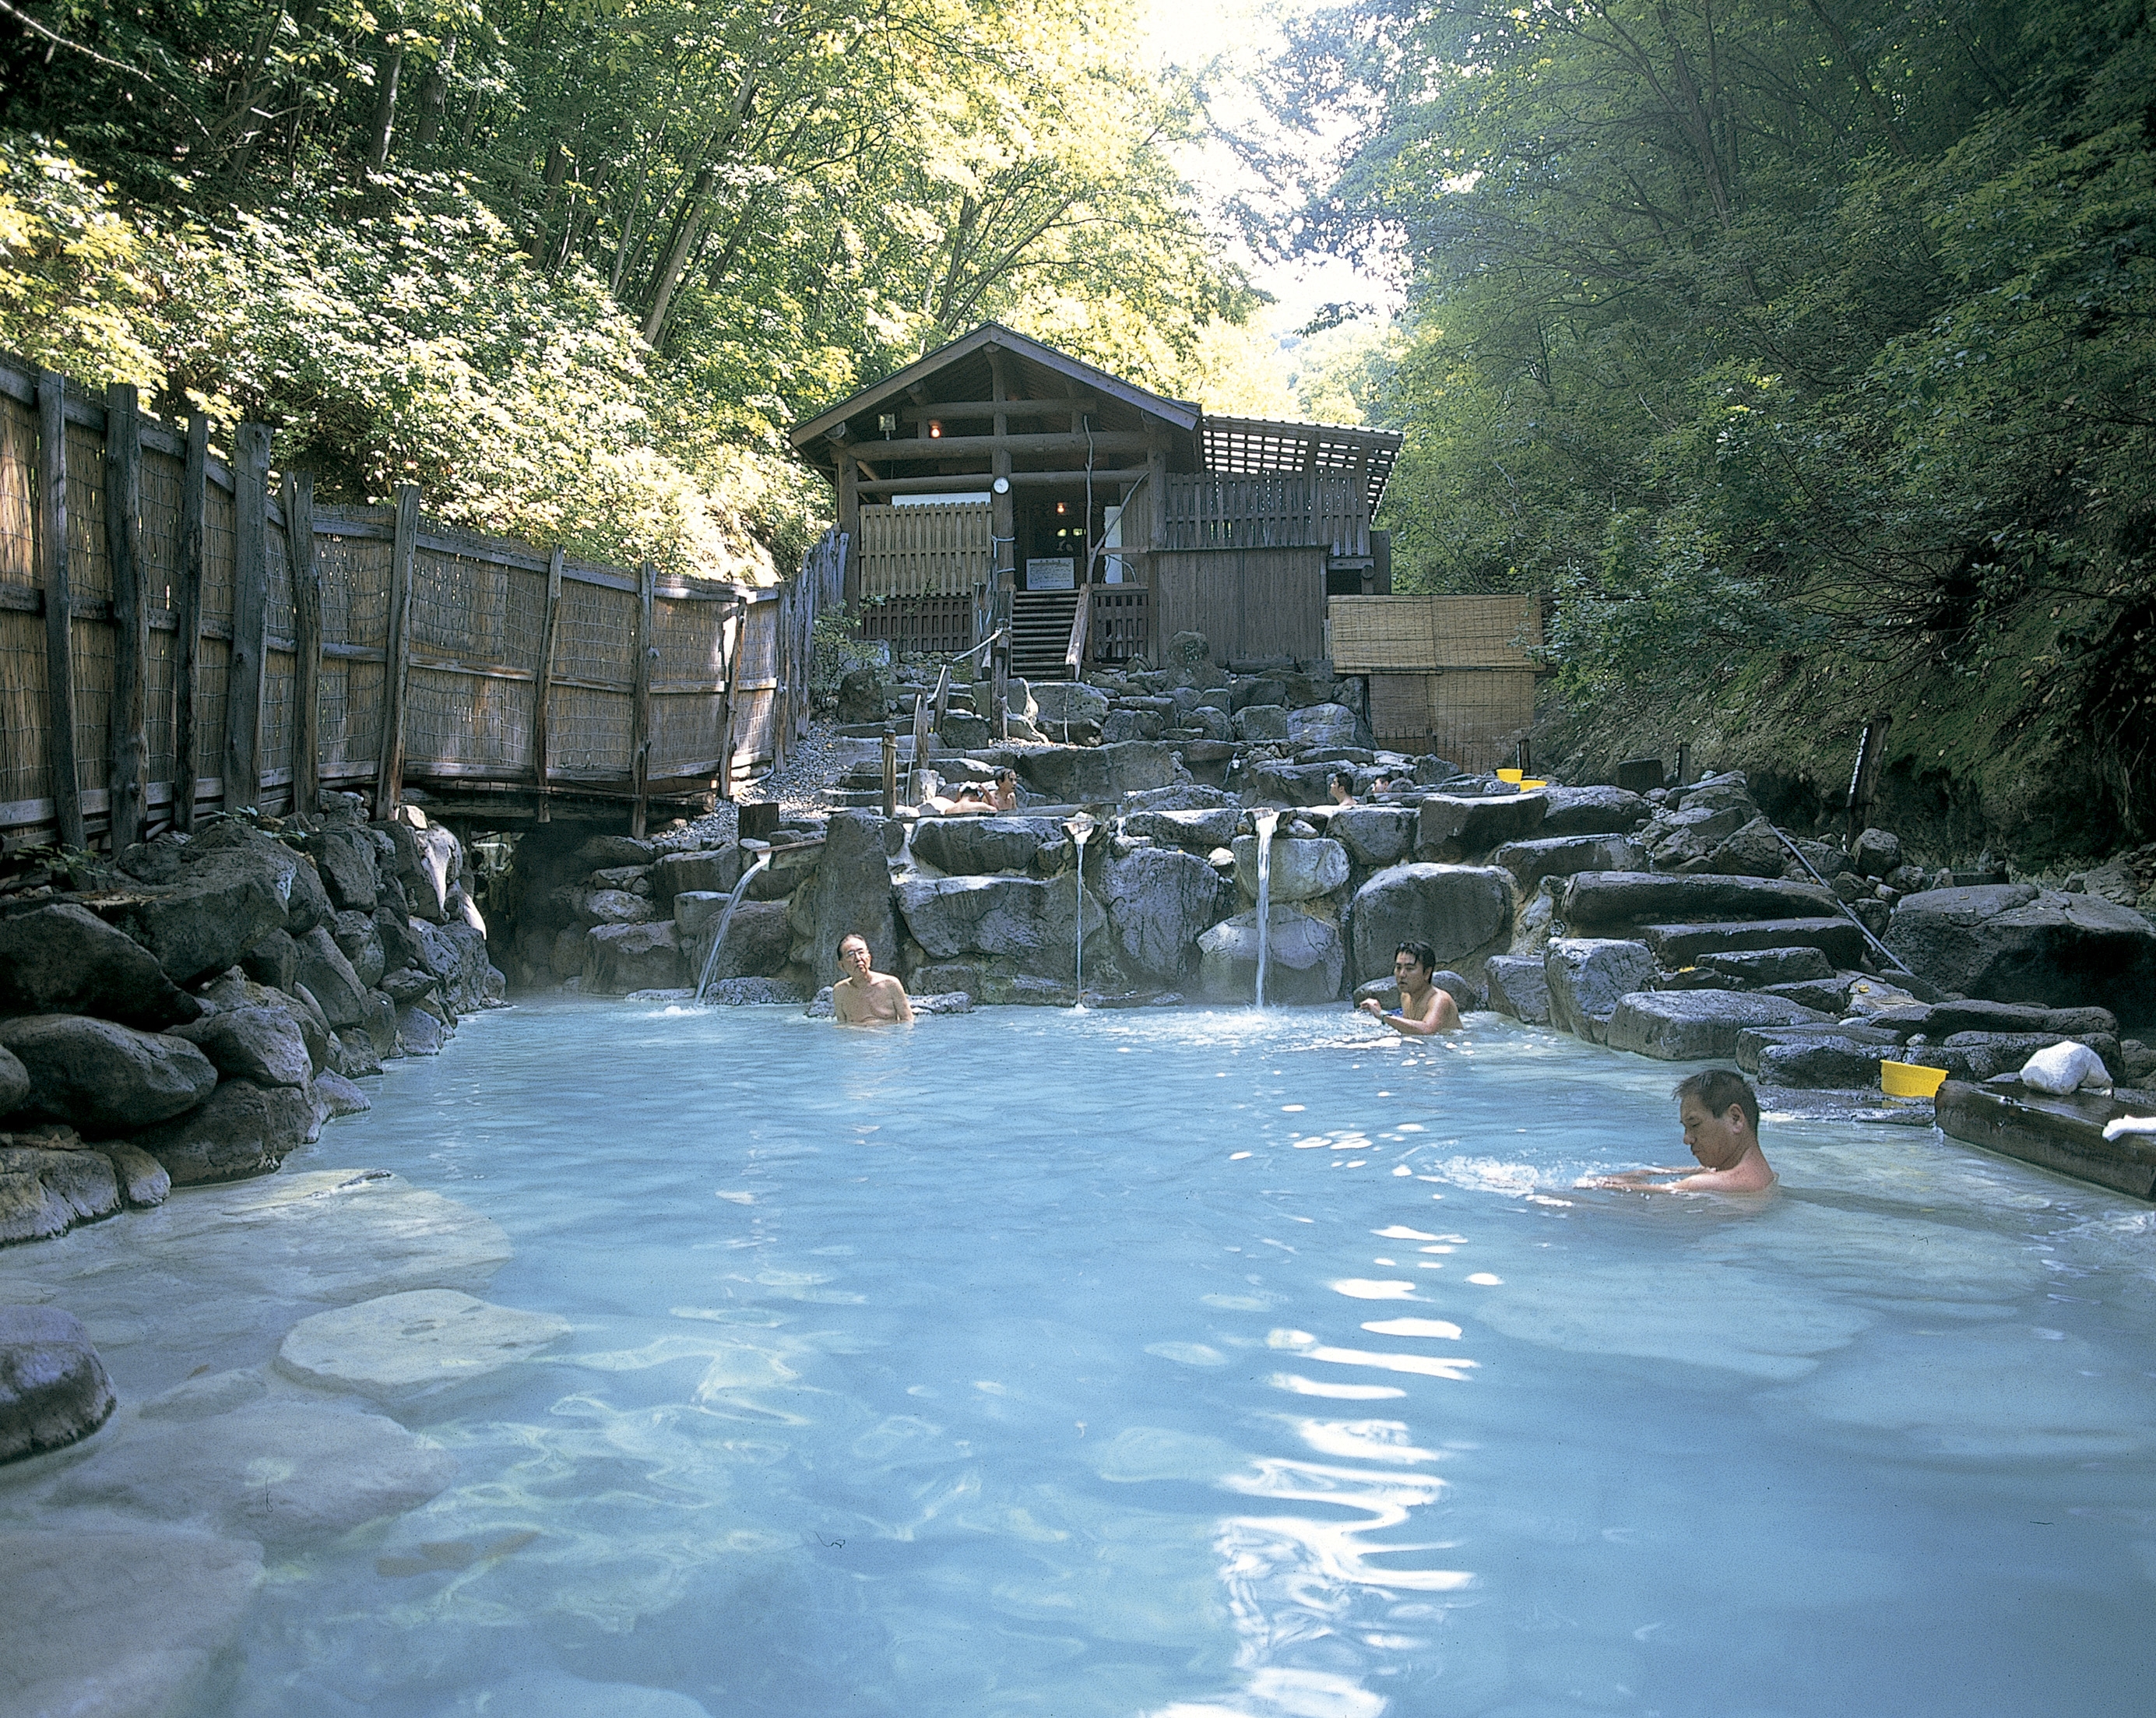 Onsens in Niseko: Hot Springs You'll Want to Jump Right Into - WanderLuxe